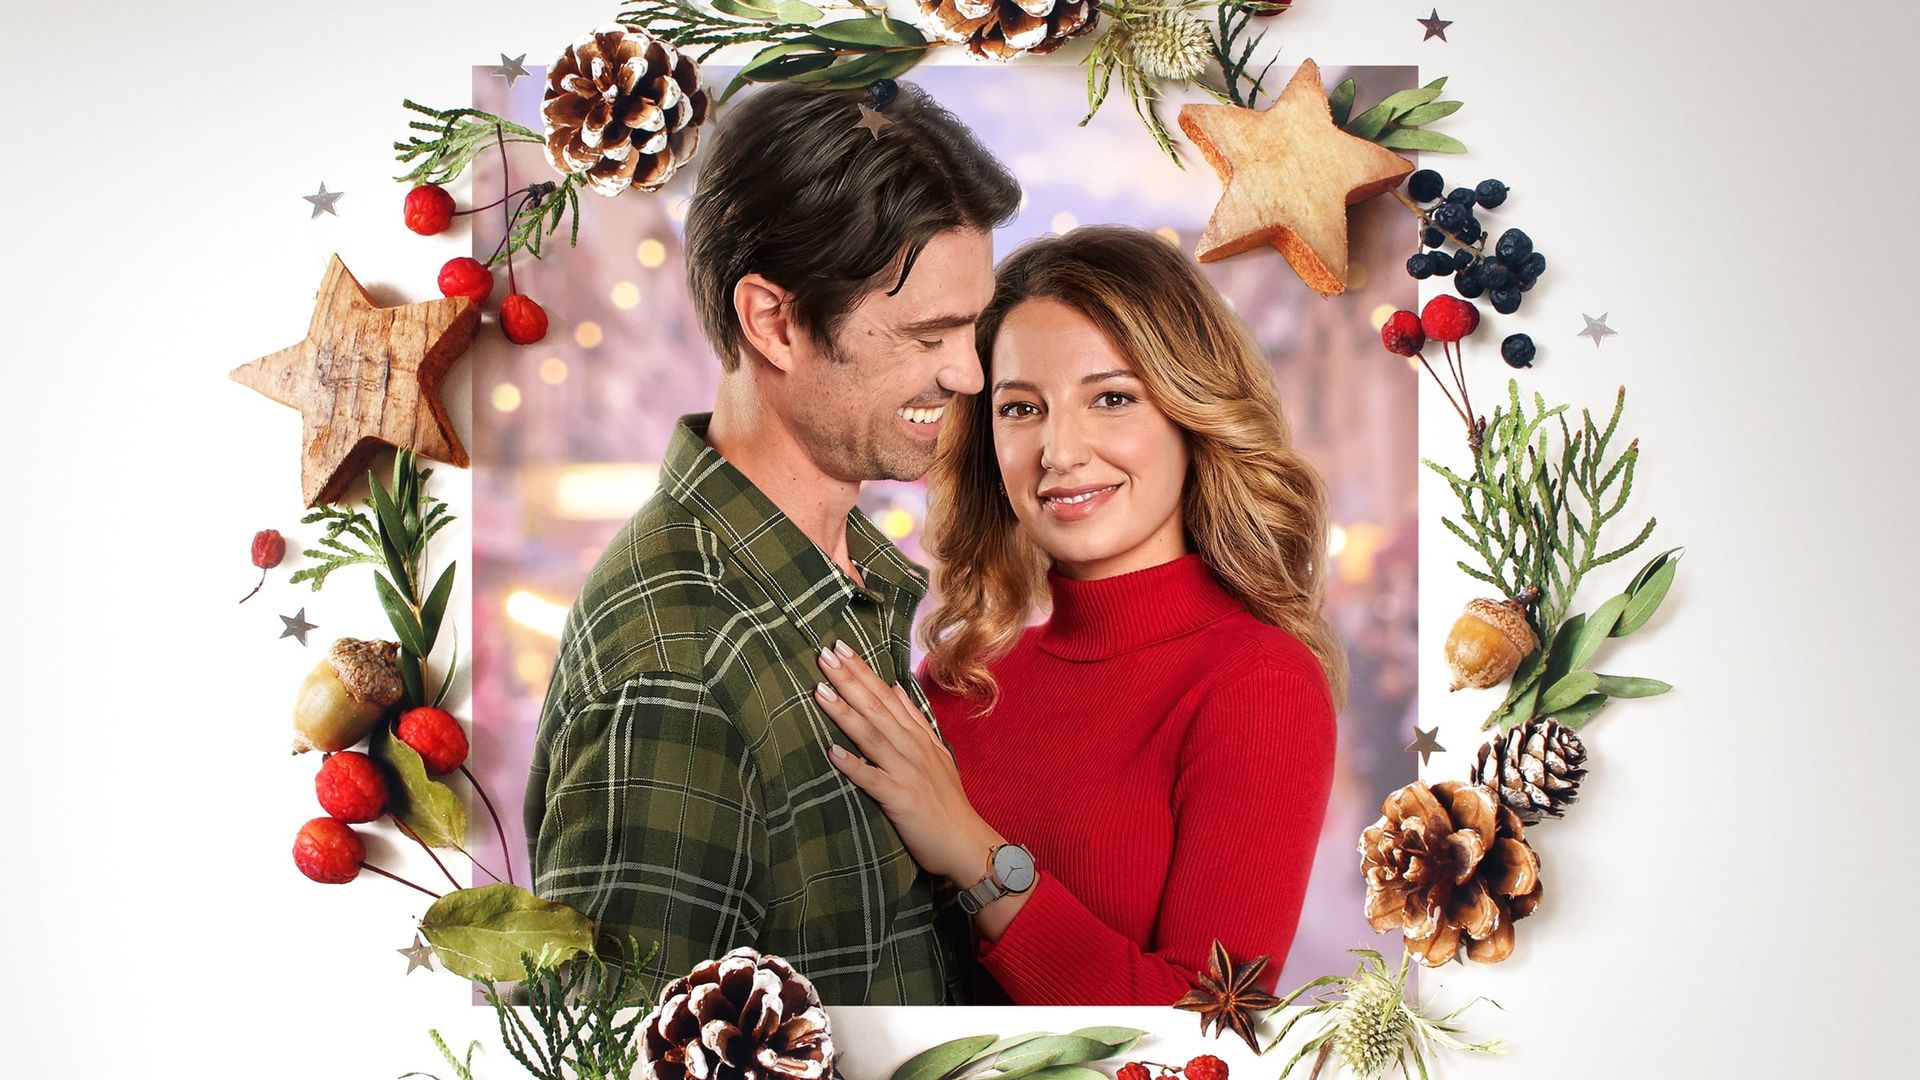 Heart of the Holidays background